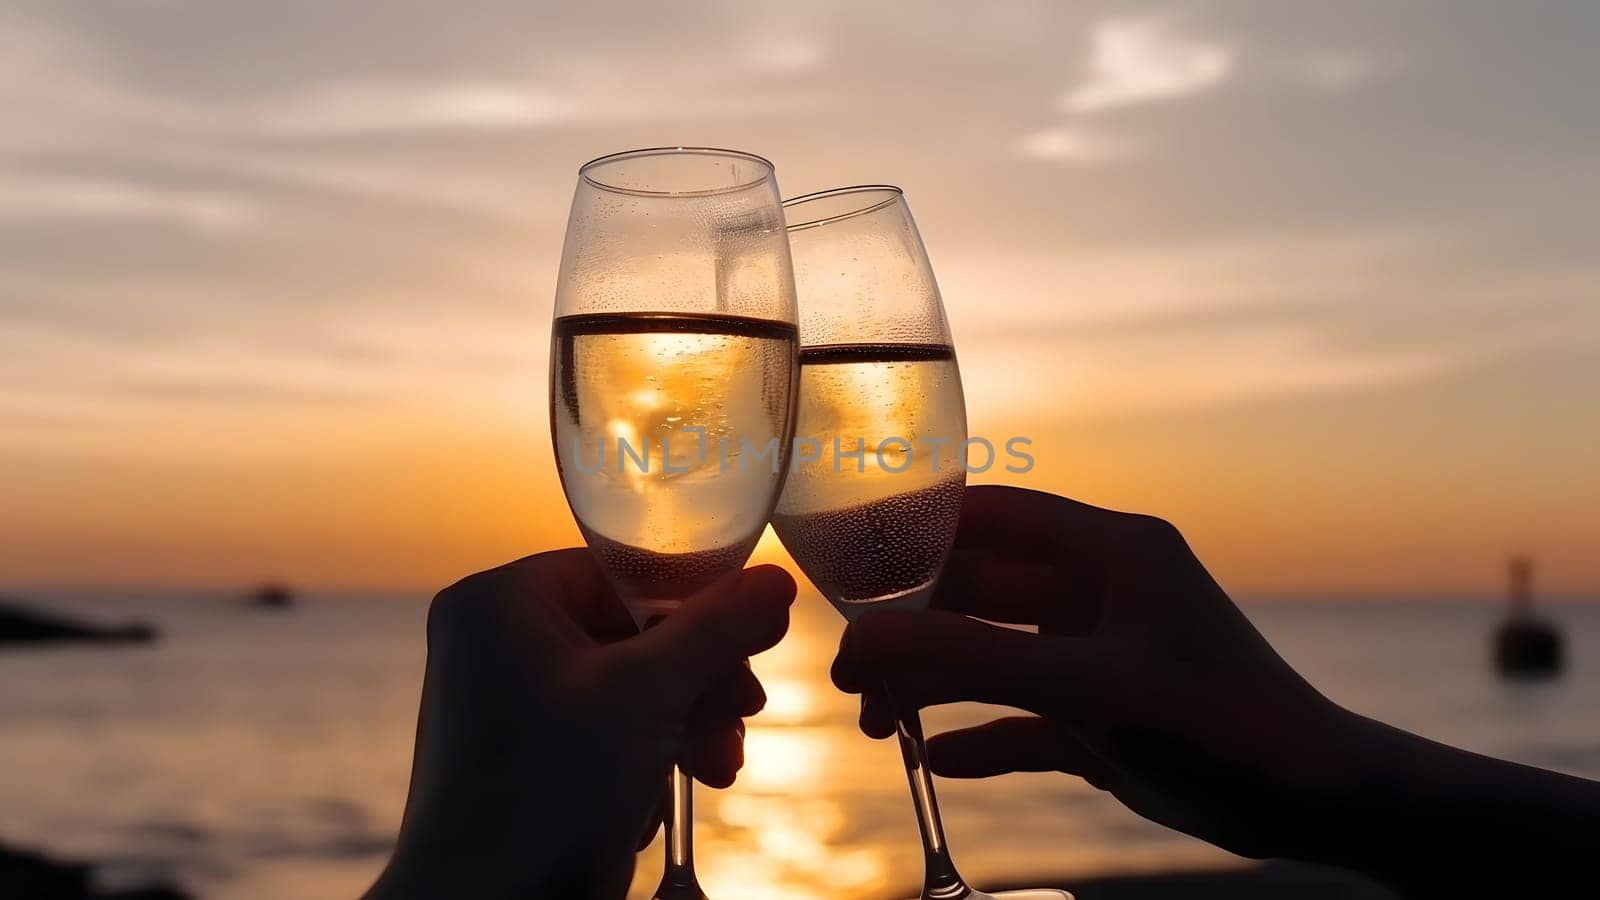 Hands holding champagne glasses over the sea. Romantic vacation, neural network generated image by z1b